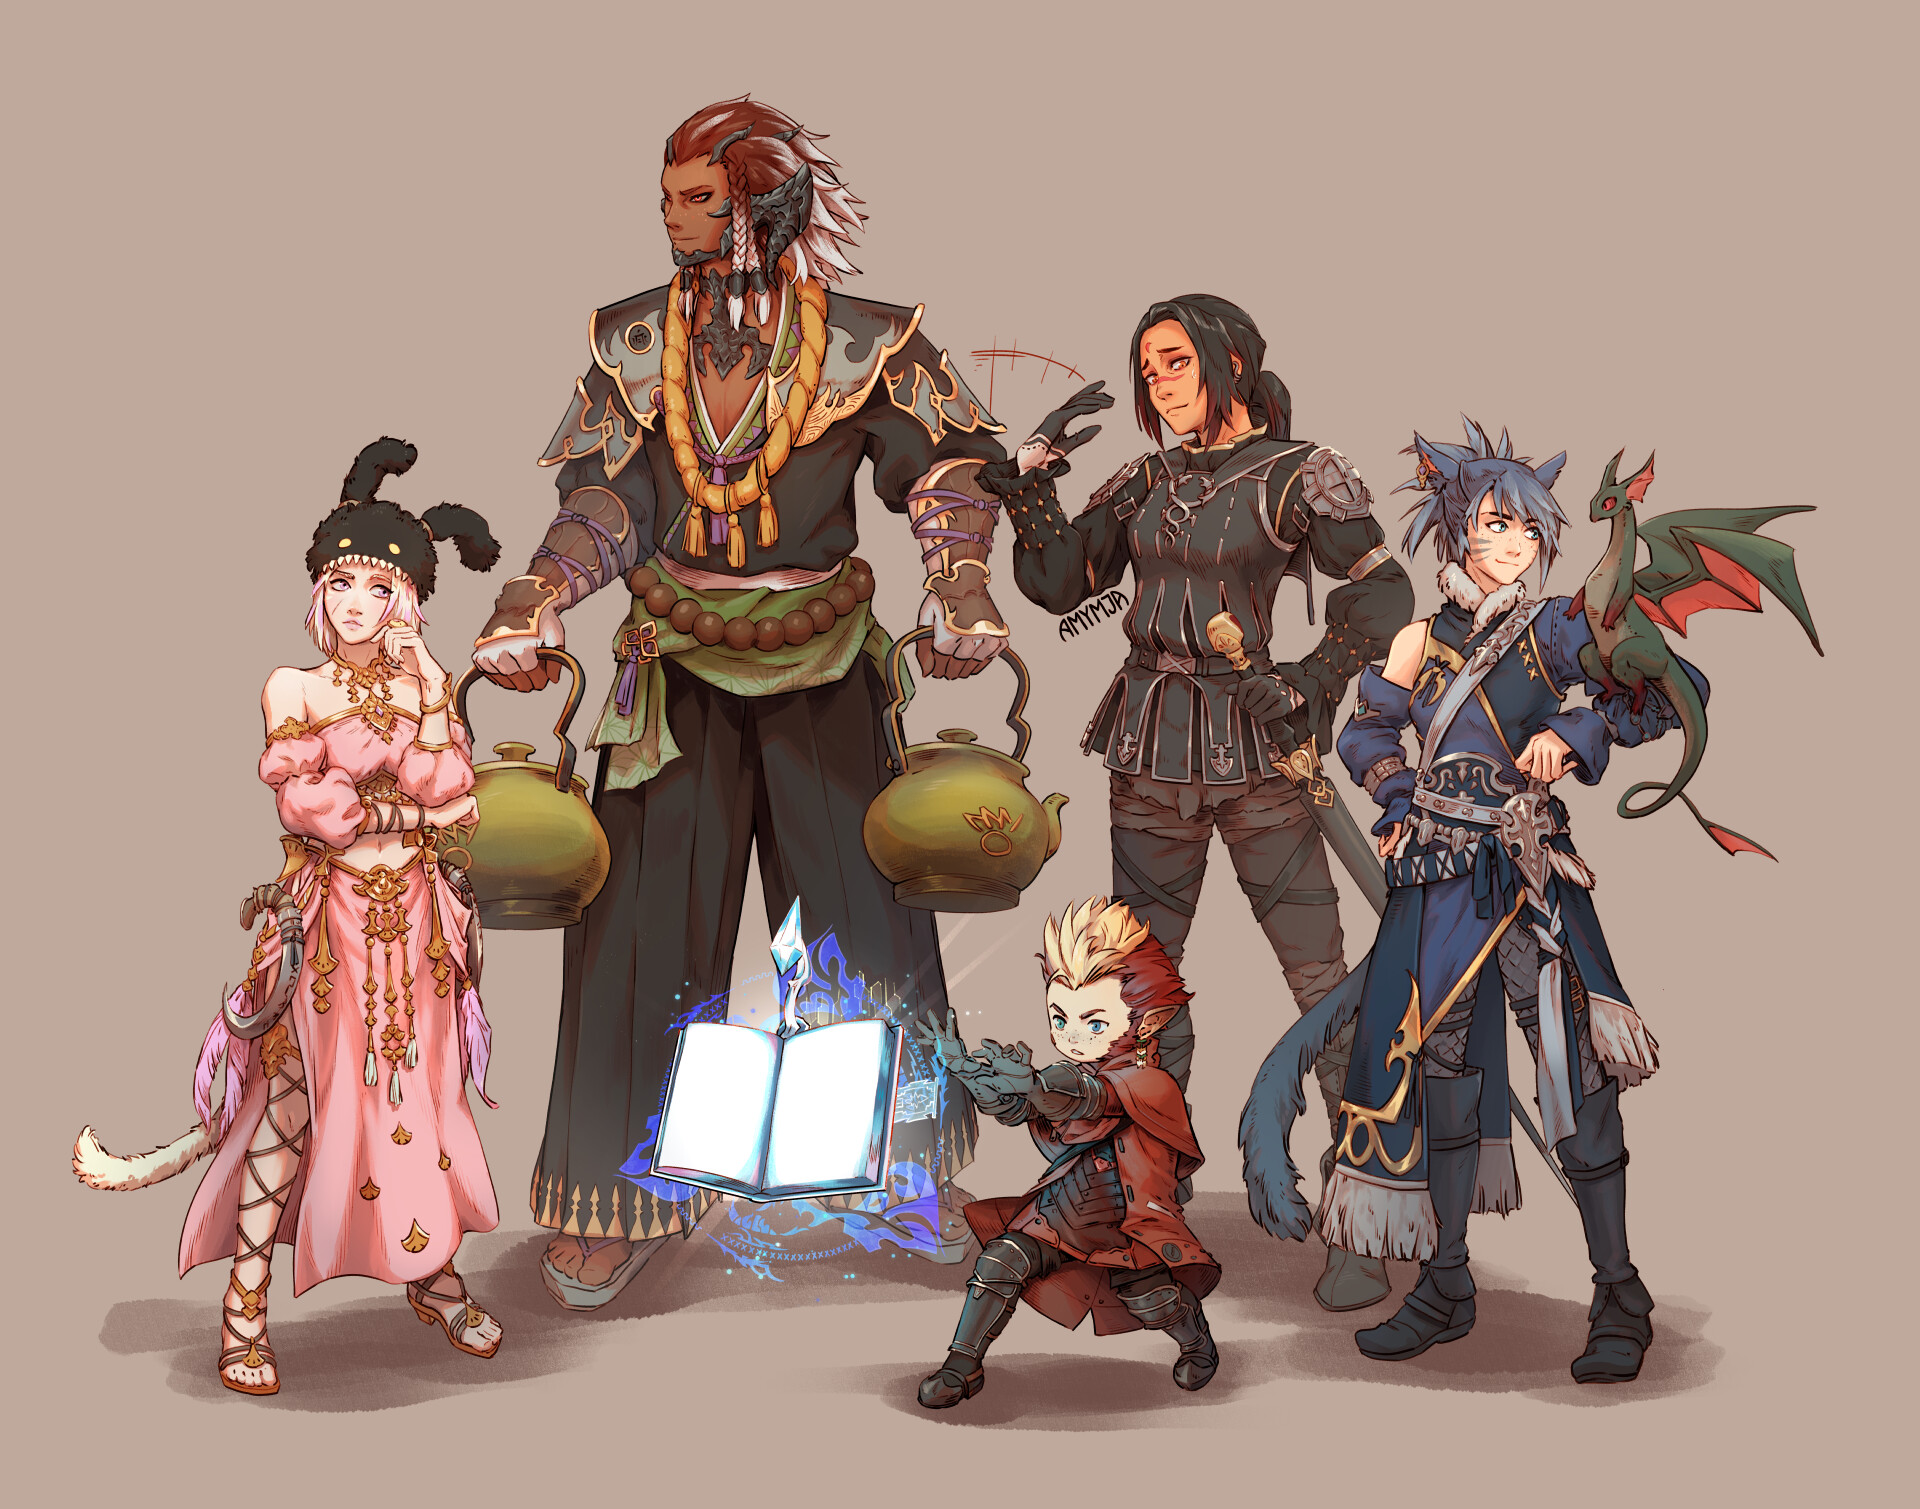 final fantasy 14 all characters